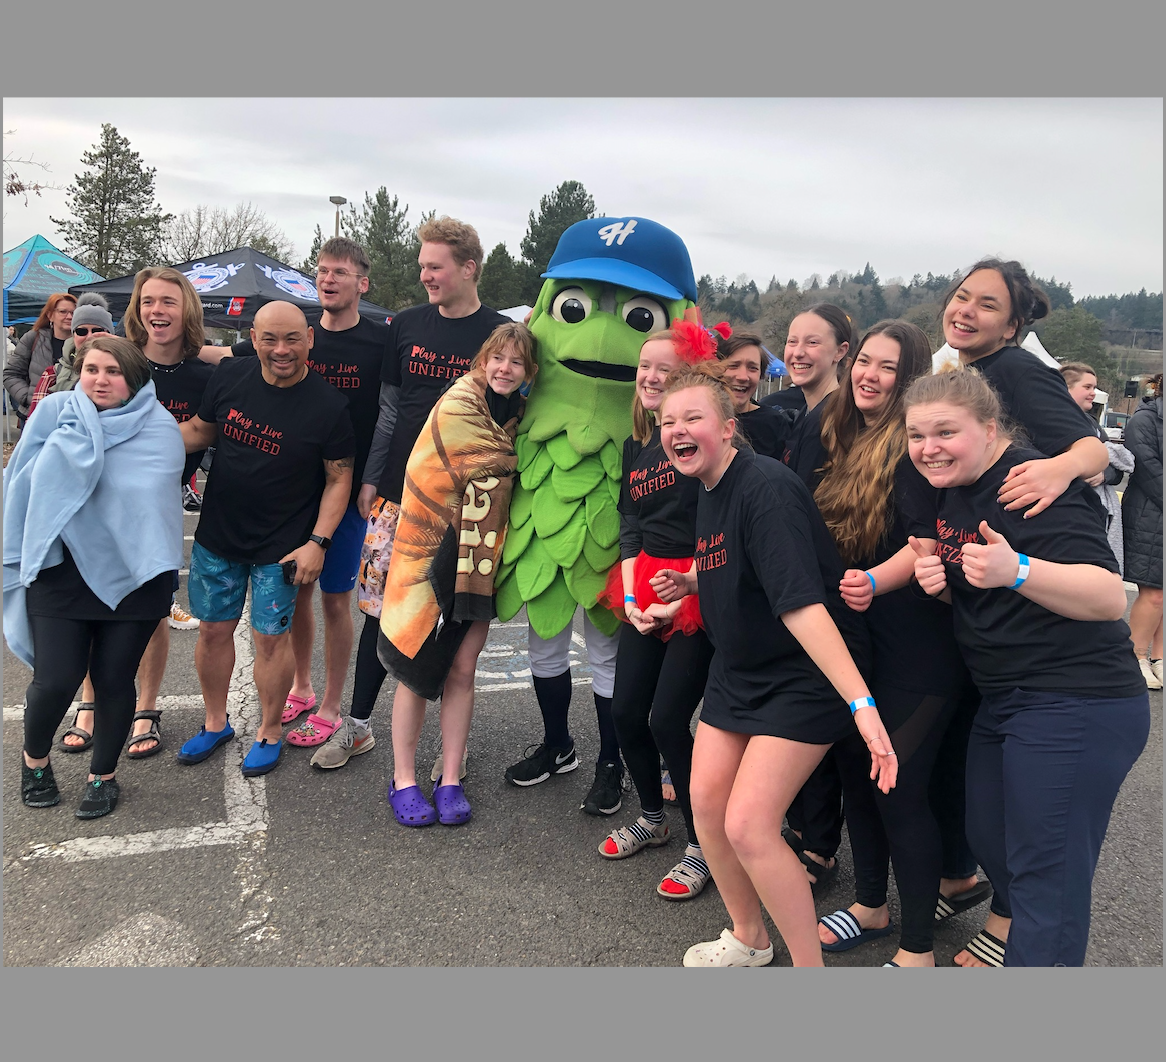 Take the Polar Plunge for Special Olympics & Pacific Unified Sports